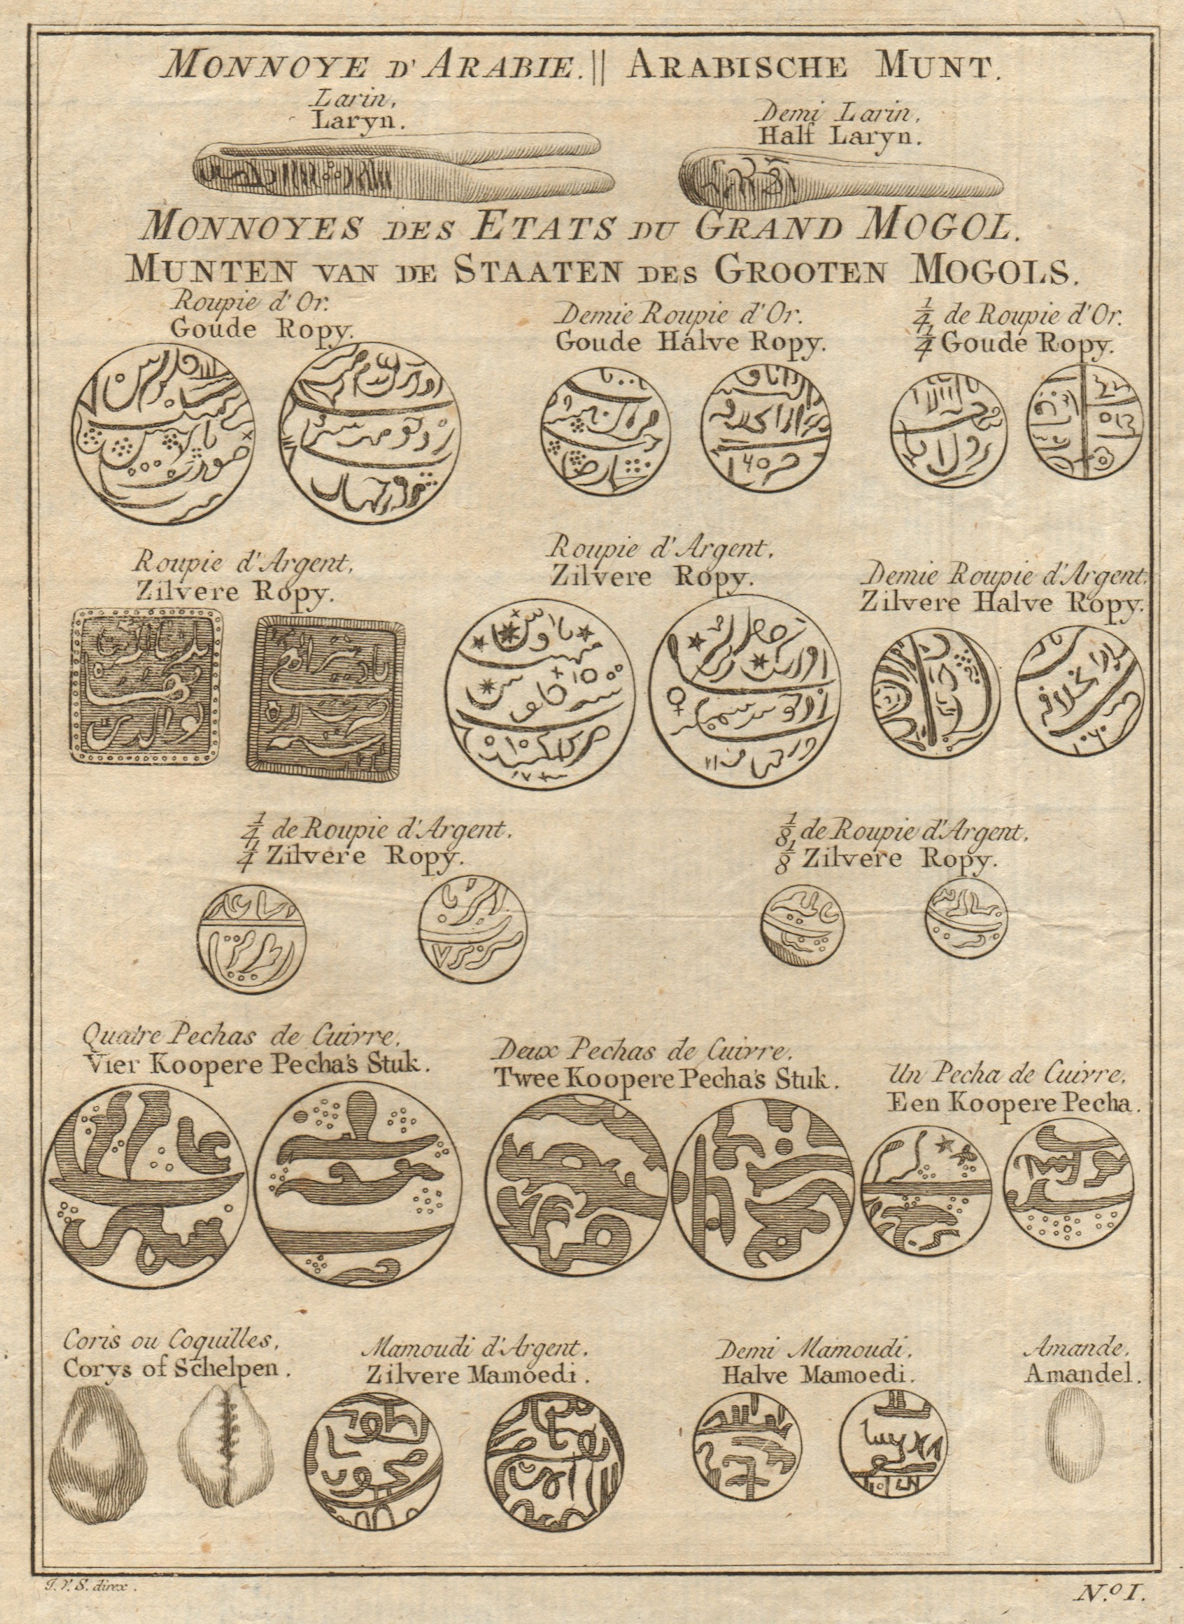 Associate Product Coins of Arabia & the states of the Great Mogul. SCHLEY 1755 old antique print